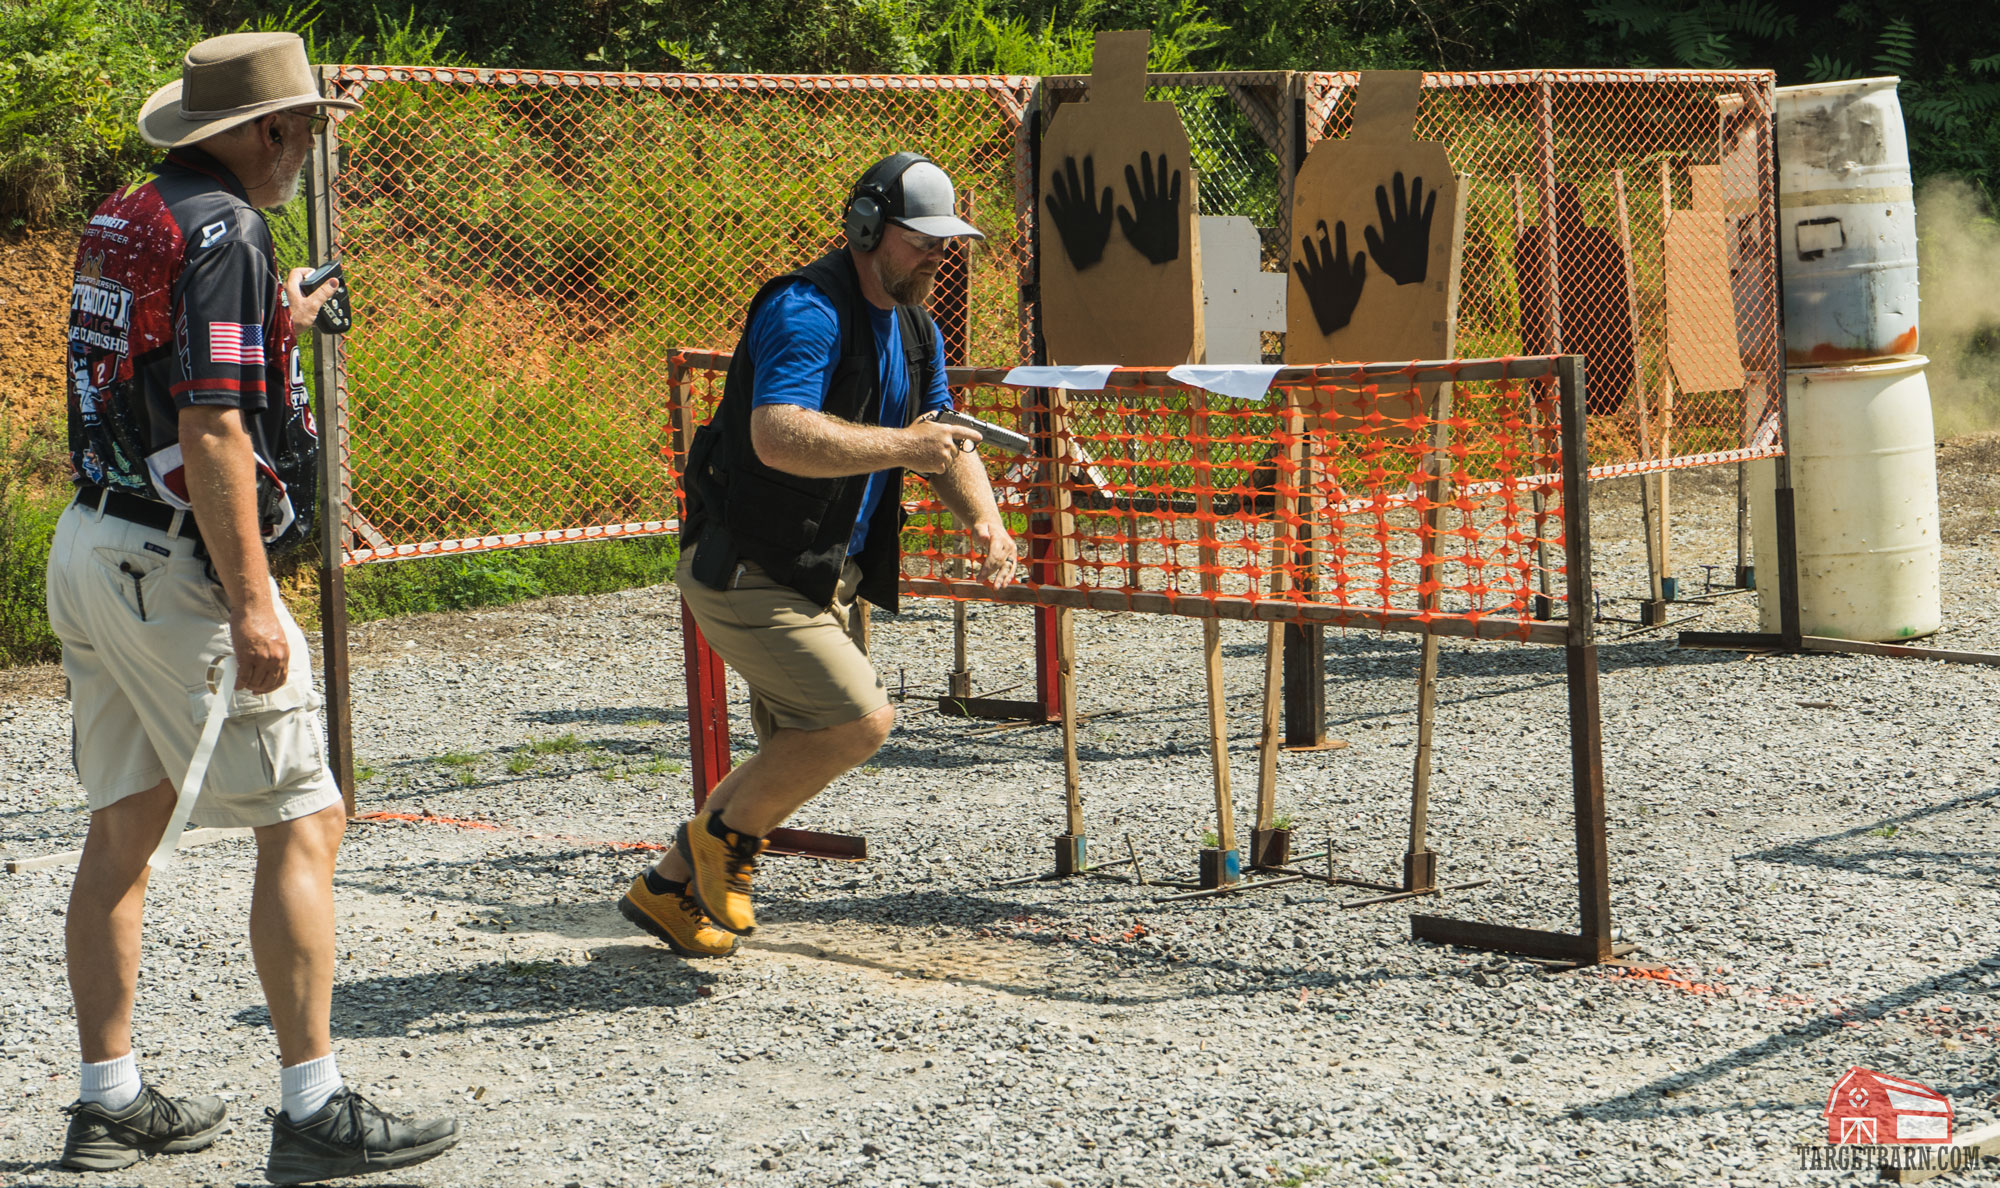 IDPA Divisions Explained How Are The Divisions Split Up?